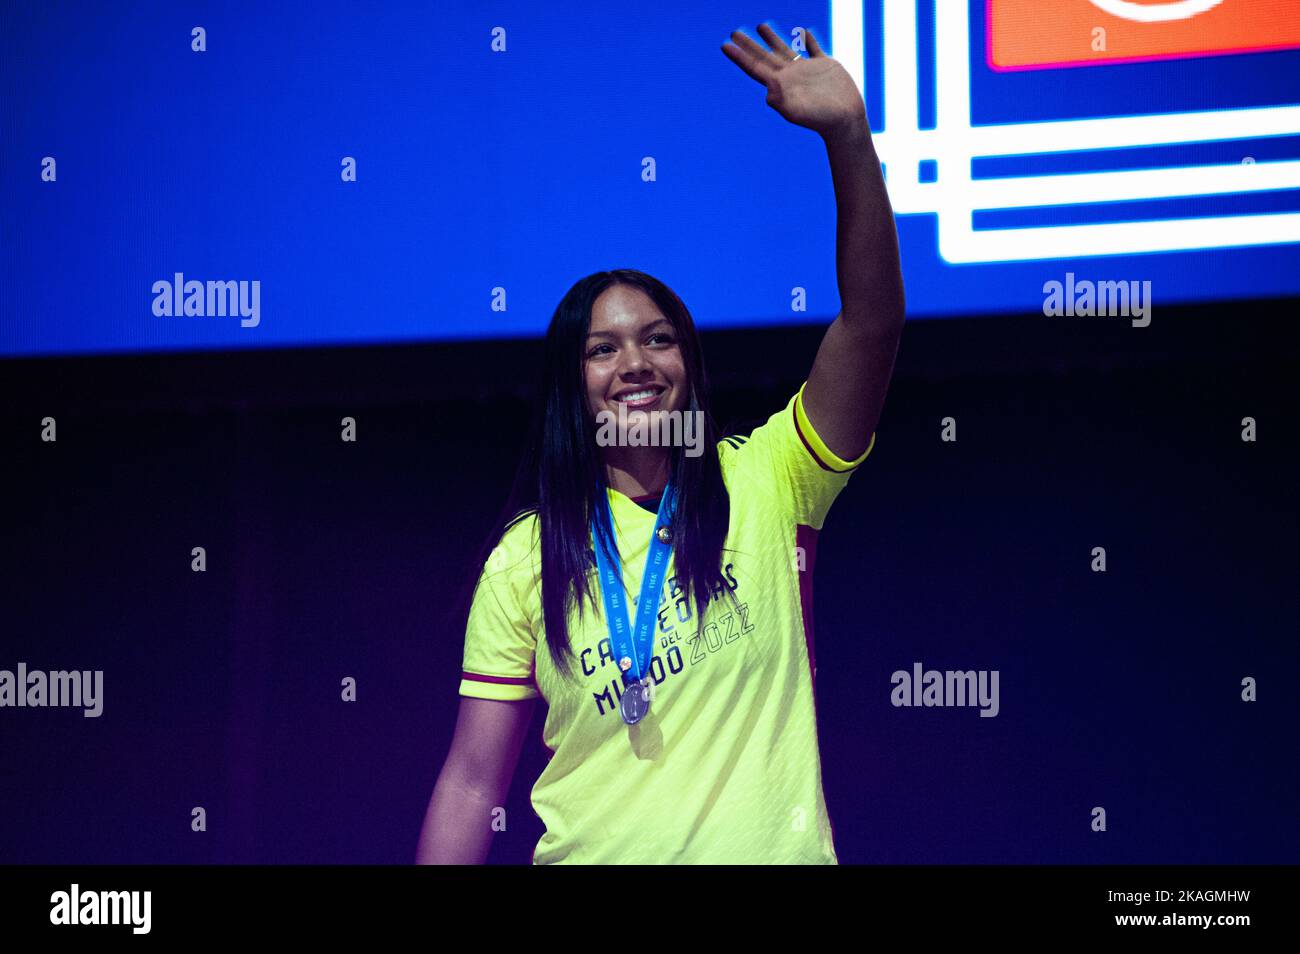 Bogota, Colombia. 02nd Nov, 2022. Goalkeeper Luisa Fernanda Agudelo during the welcoming of Colombia's FIFA U-17 Womens team after the U-17 World Cup after reaching the final match against Spain, in Bogota, Colombia, November 2, 2022. Photo by: Chepa Beltran/Long Visual Press Credit: Long Visual Press/Alamy Live News Stock Photo